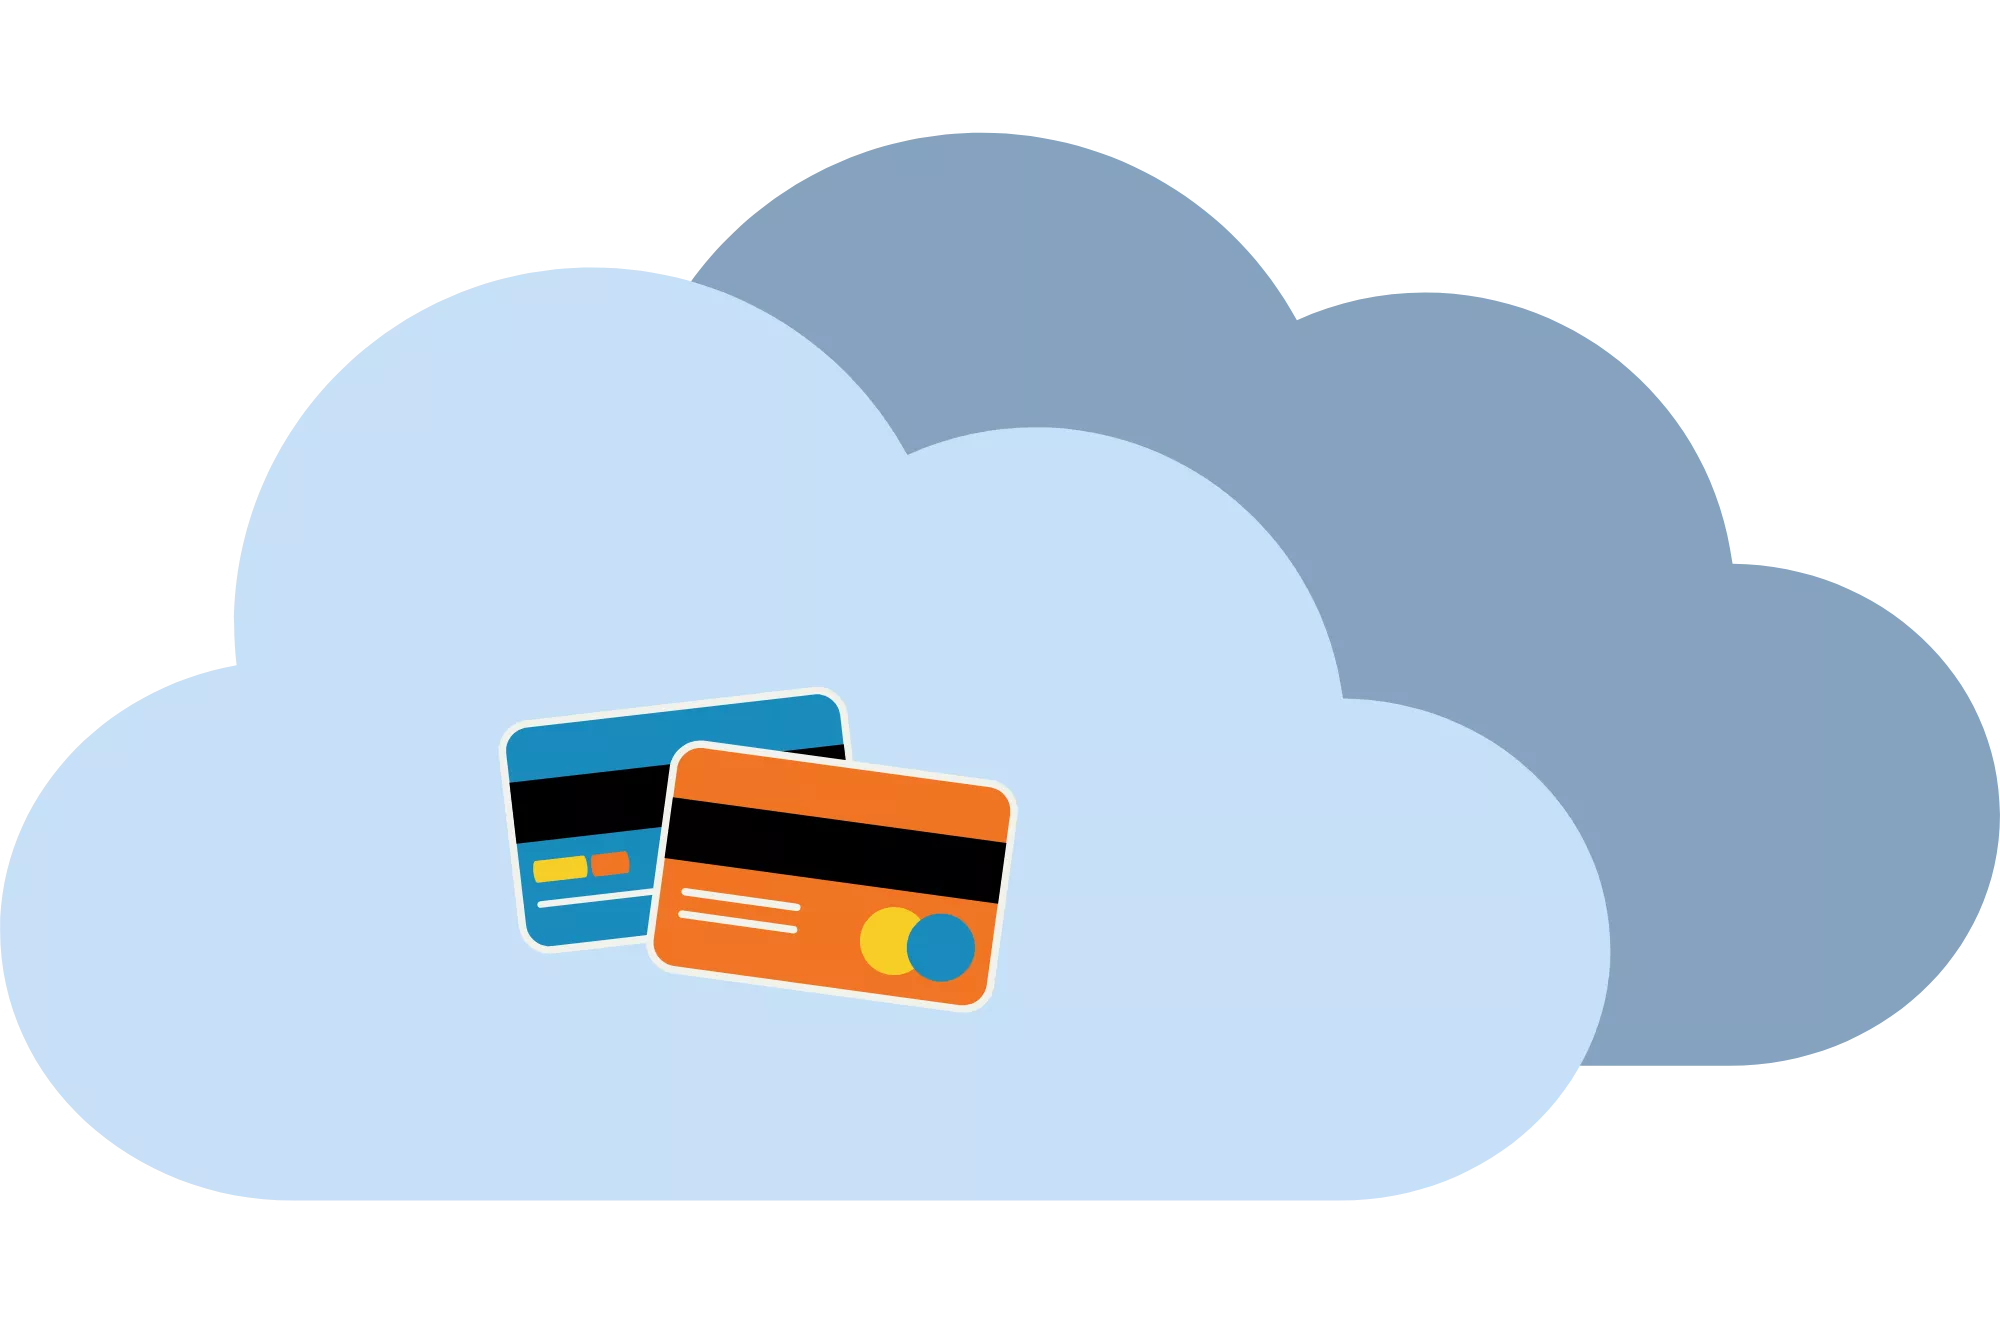 A cloud with a credit card on it to represent cloud-based payment gateway types